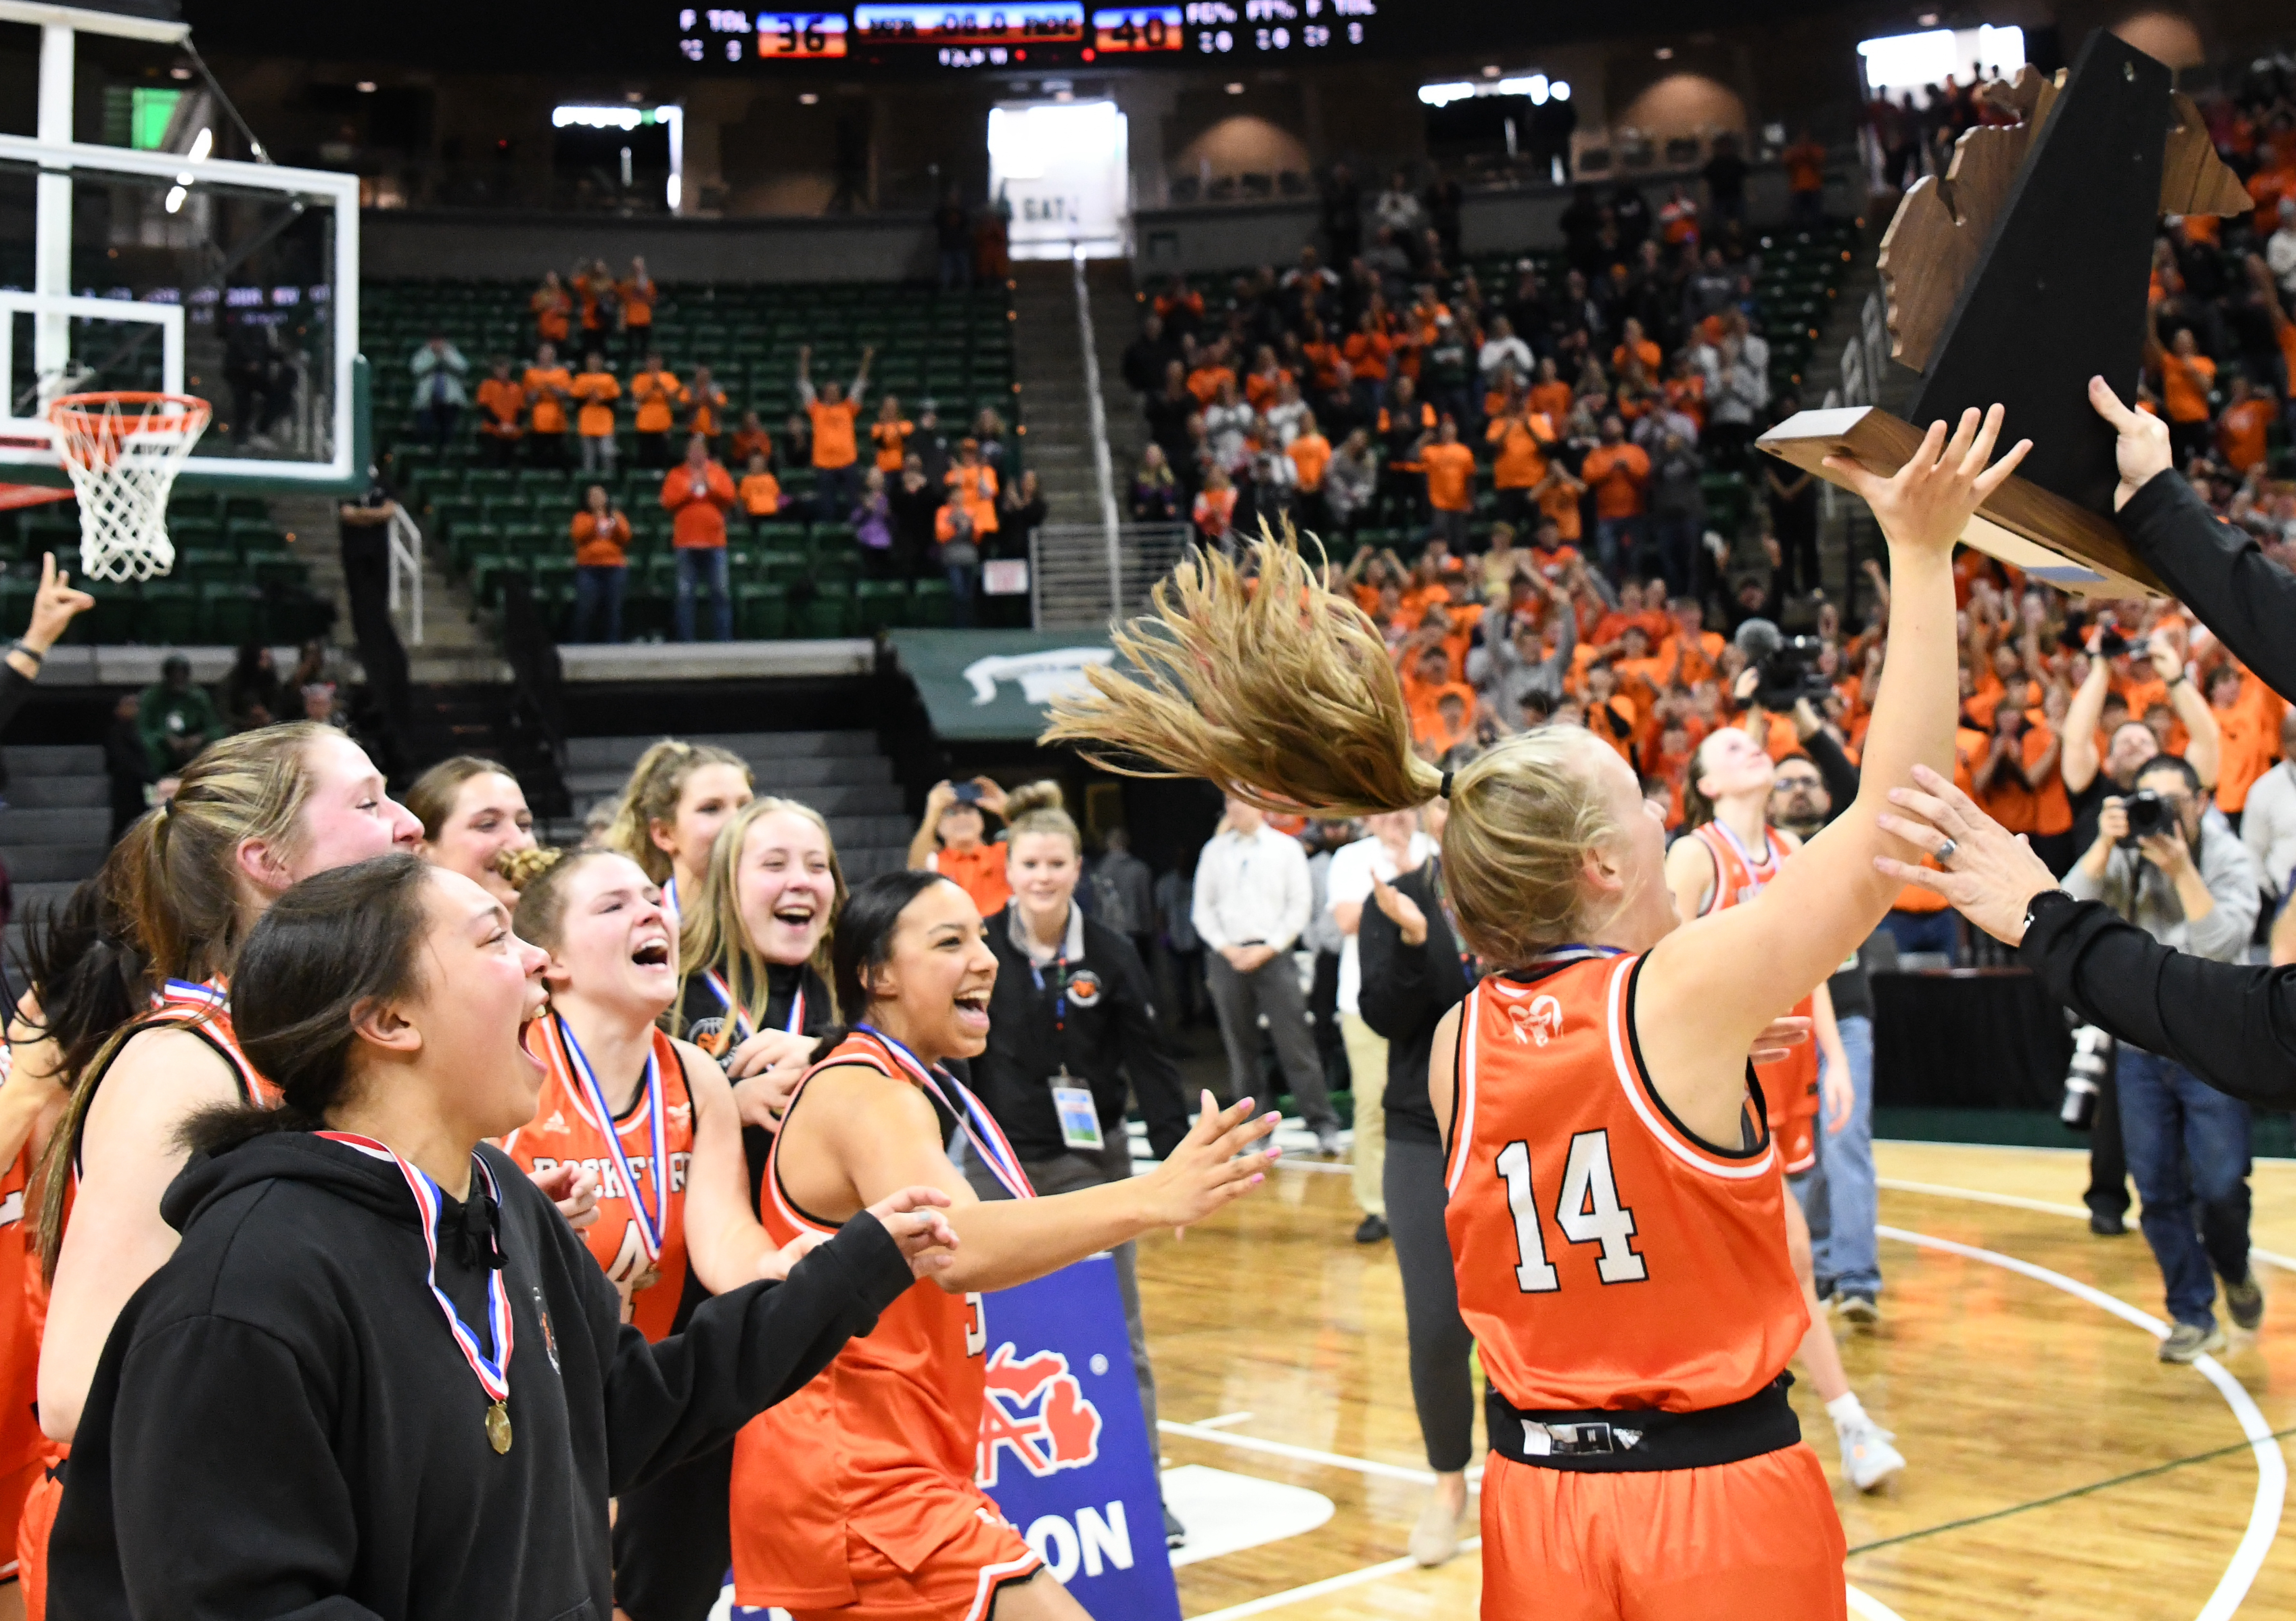 Kayla MacLaren (14) is presented the championship trophy while her teammates celebrate.